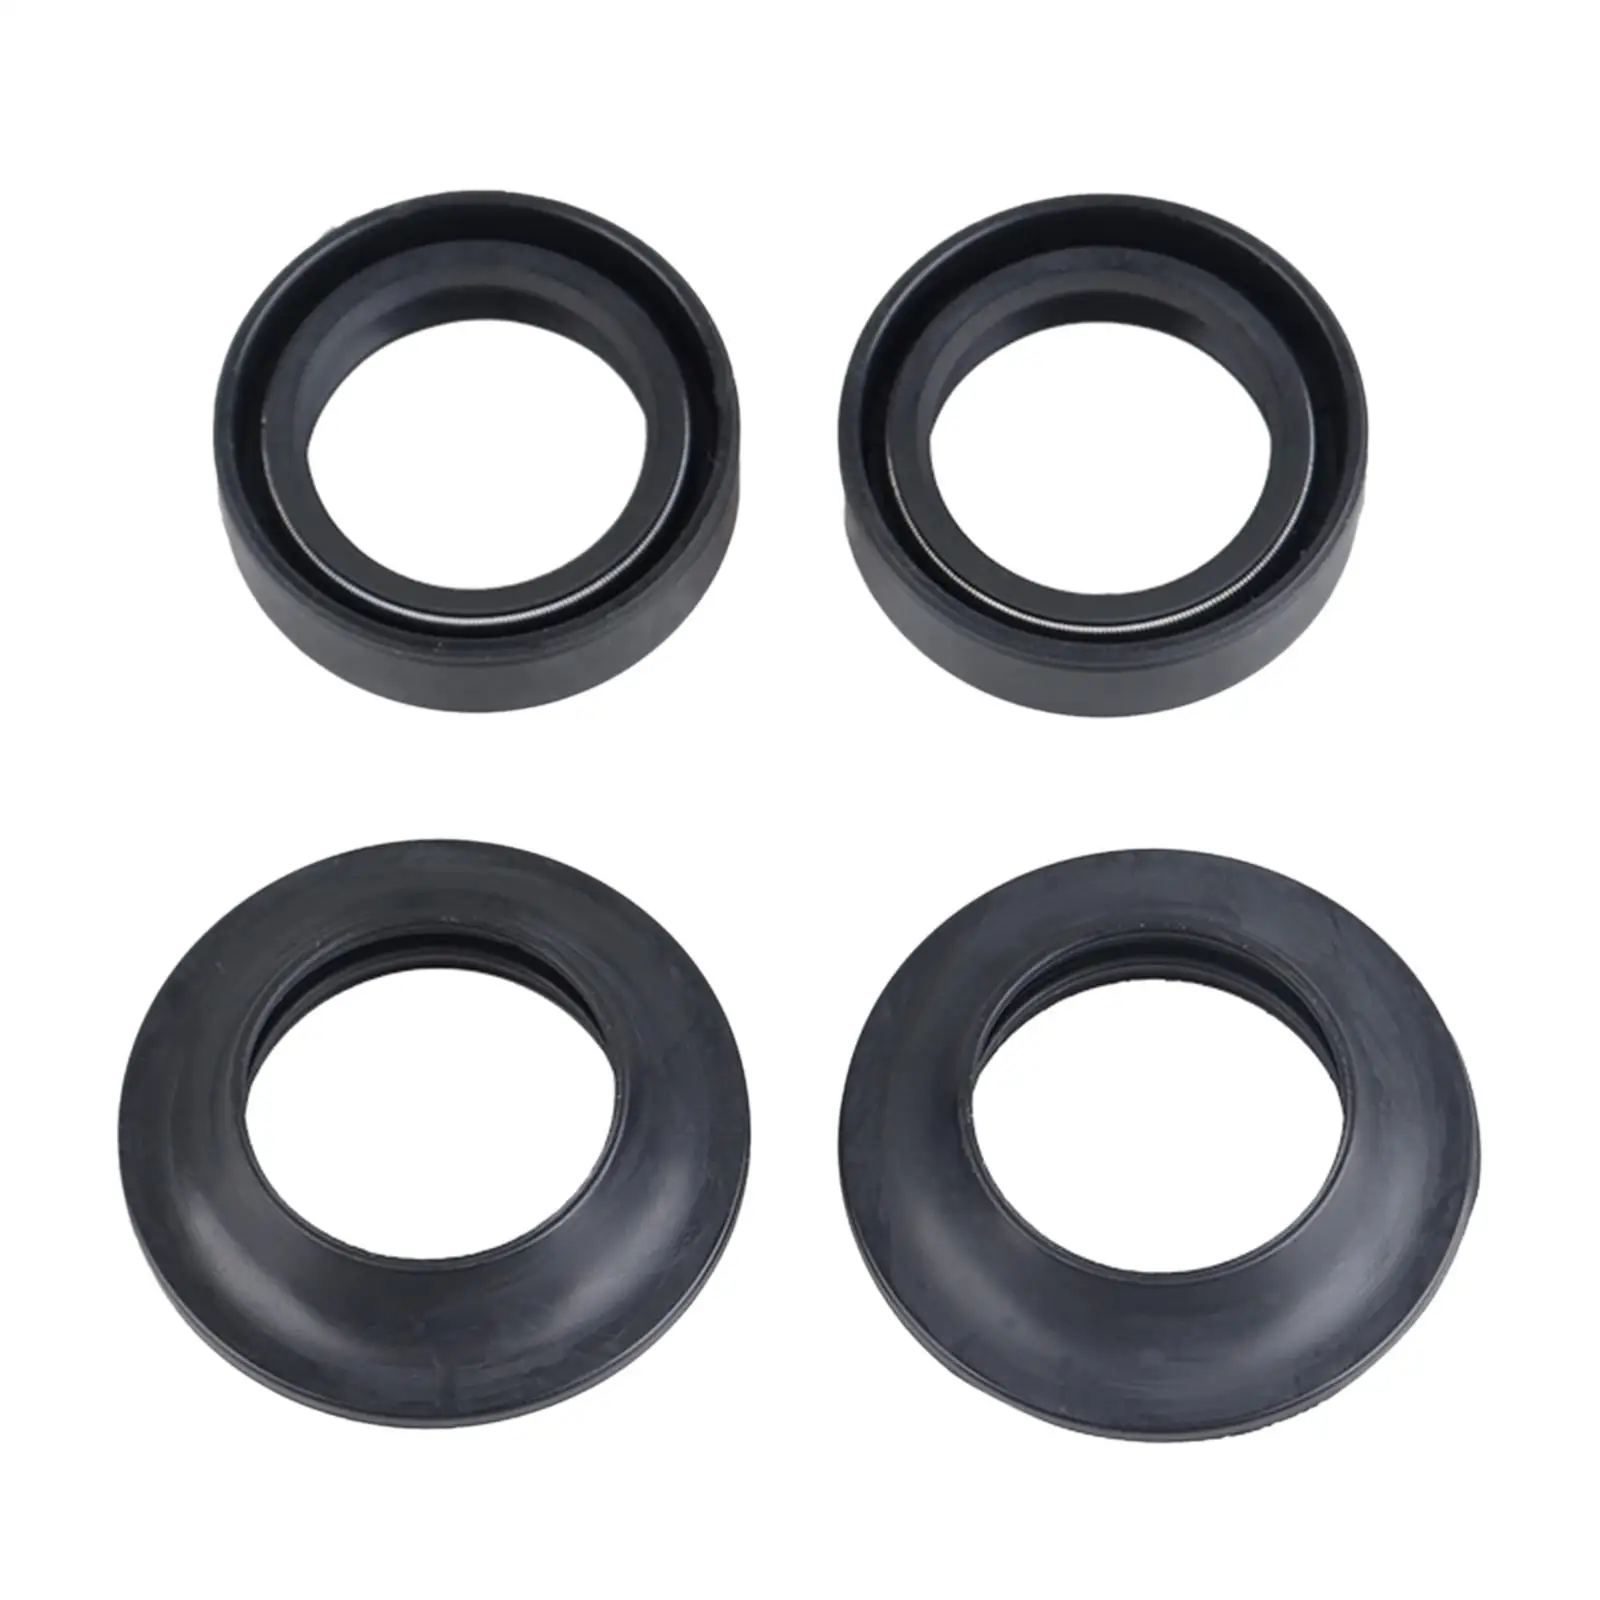 4 Pieces Oil and Dust Seal Motorcycle Accessories for Yamaha PW80 Ttr90